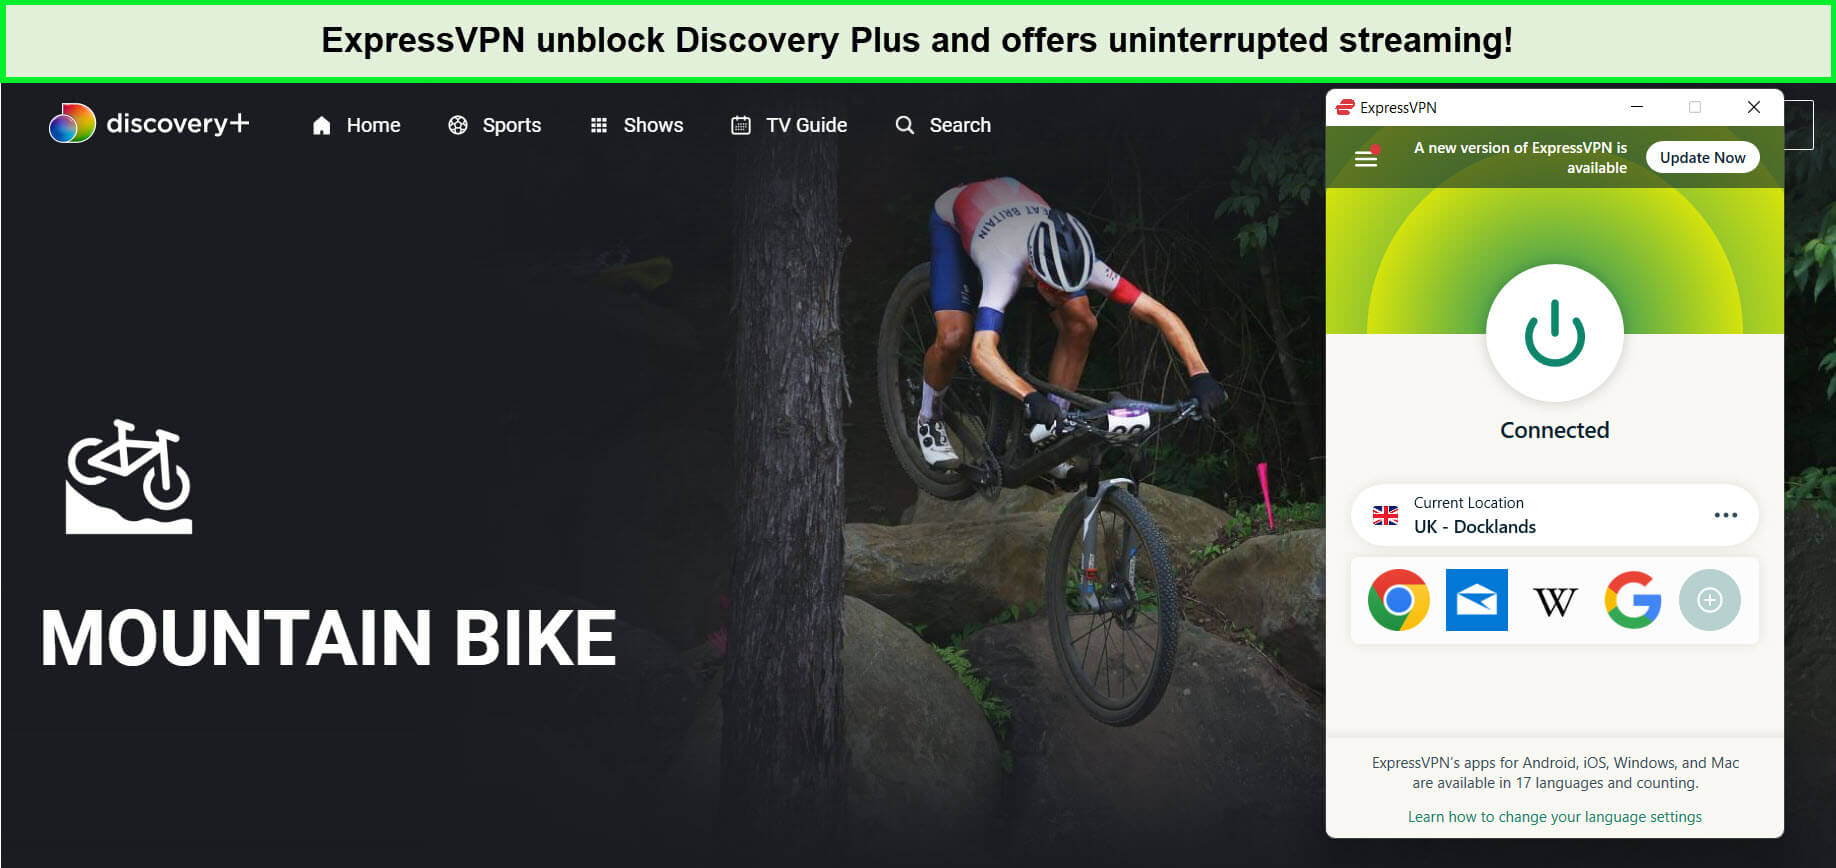 expressvpn-unblocks-uci-mountain-bike-world-series-in-Germany-on-discovery-plus